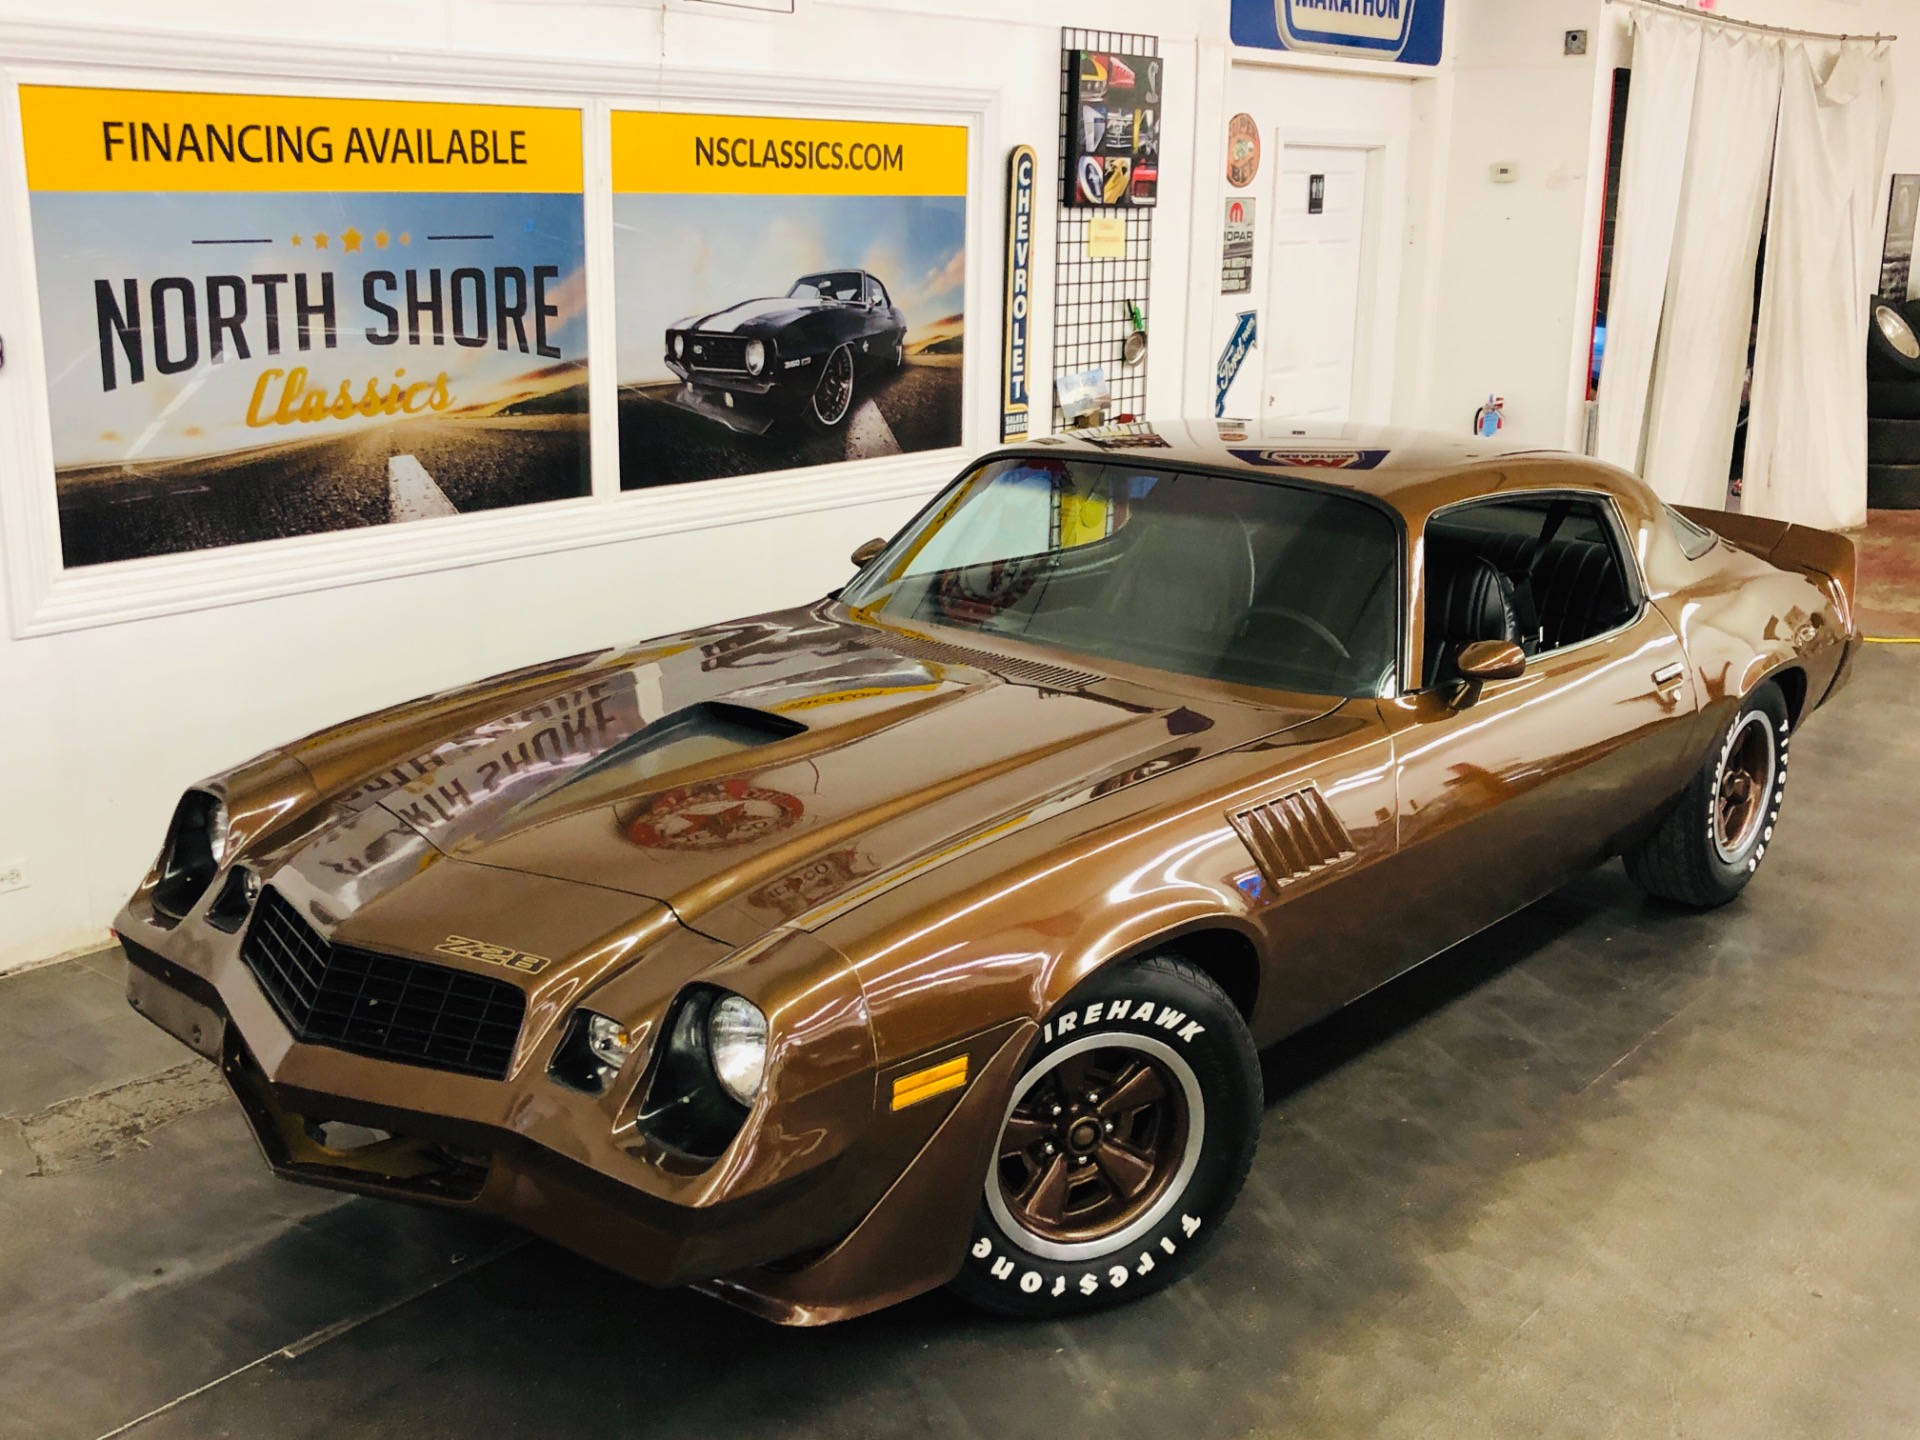 Used 1979 Chevrolet Camaro -Z/28 - 4 SPEED - FACTORY A/C - ORIGINAL PAINT -  SEE VIDEO For Sale (Sold) | North Shore Classics Stock #45379RGCV